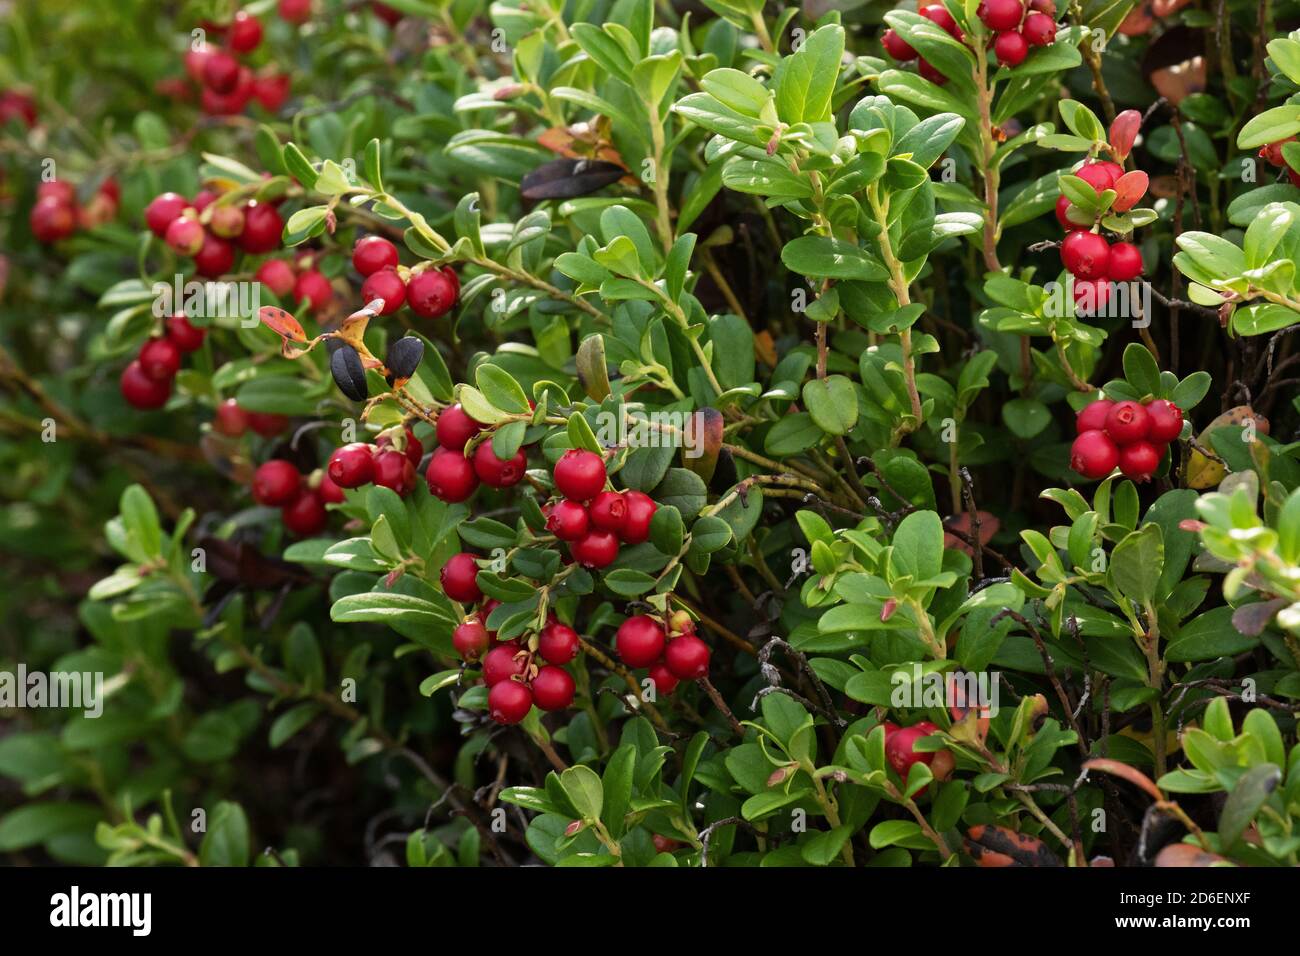 Ripe Lingonberries, Vaccinium vitis-idaea, in an old pine forest in Estonian nature, Northern forest Stock Photo